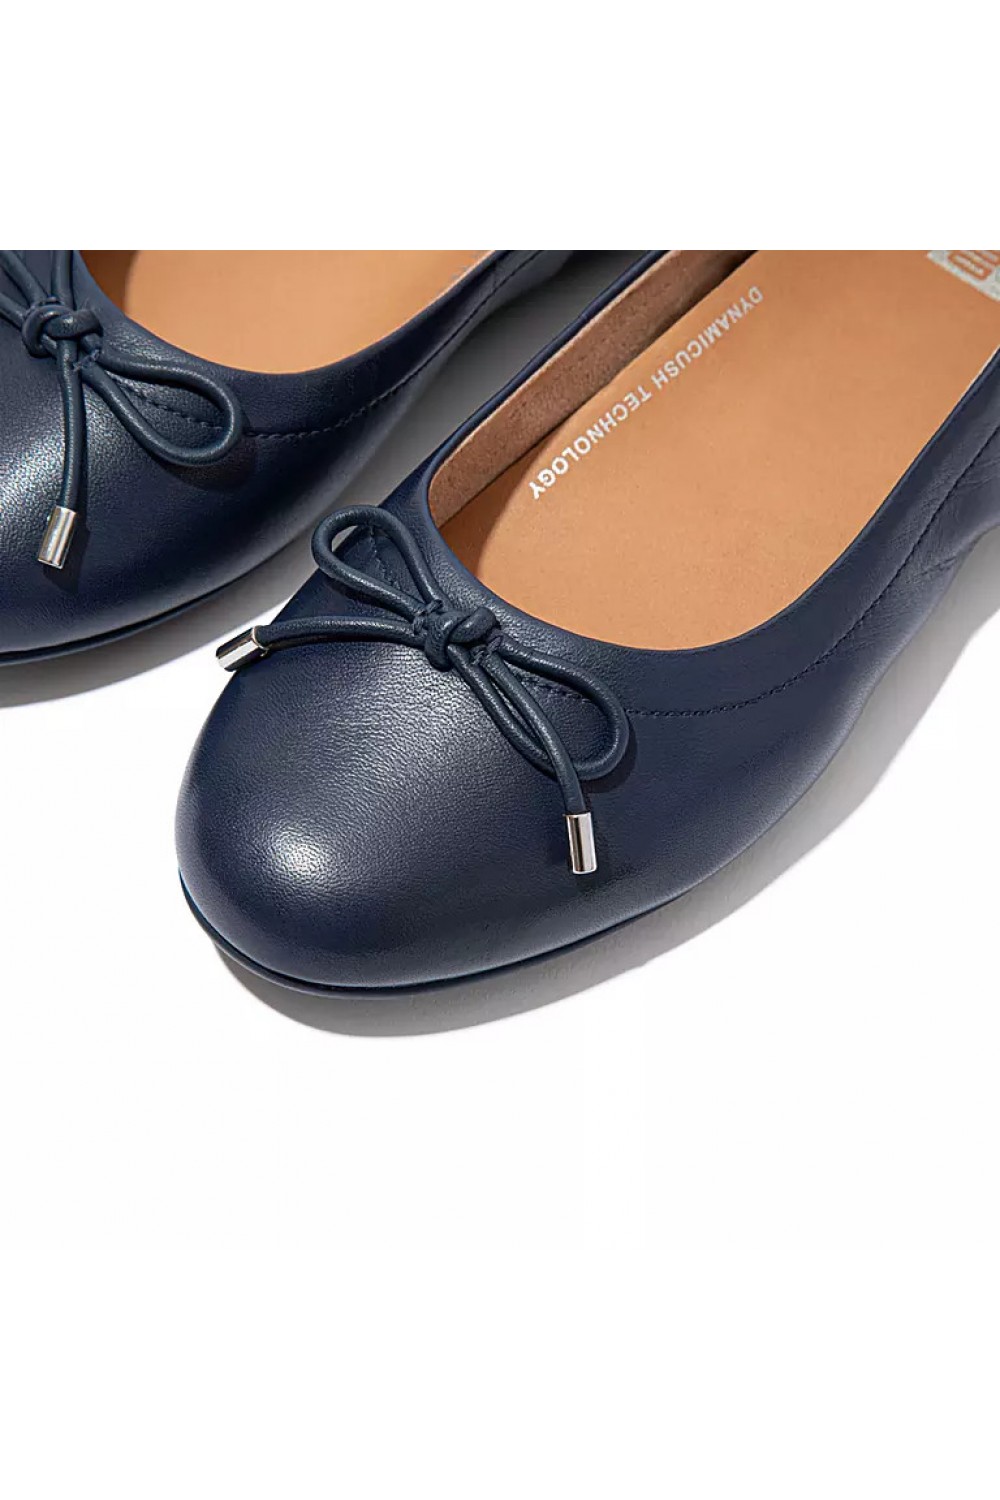 Fitflop Allegro Bow Leather Ballet Pumps Midnight Navy